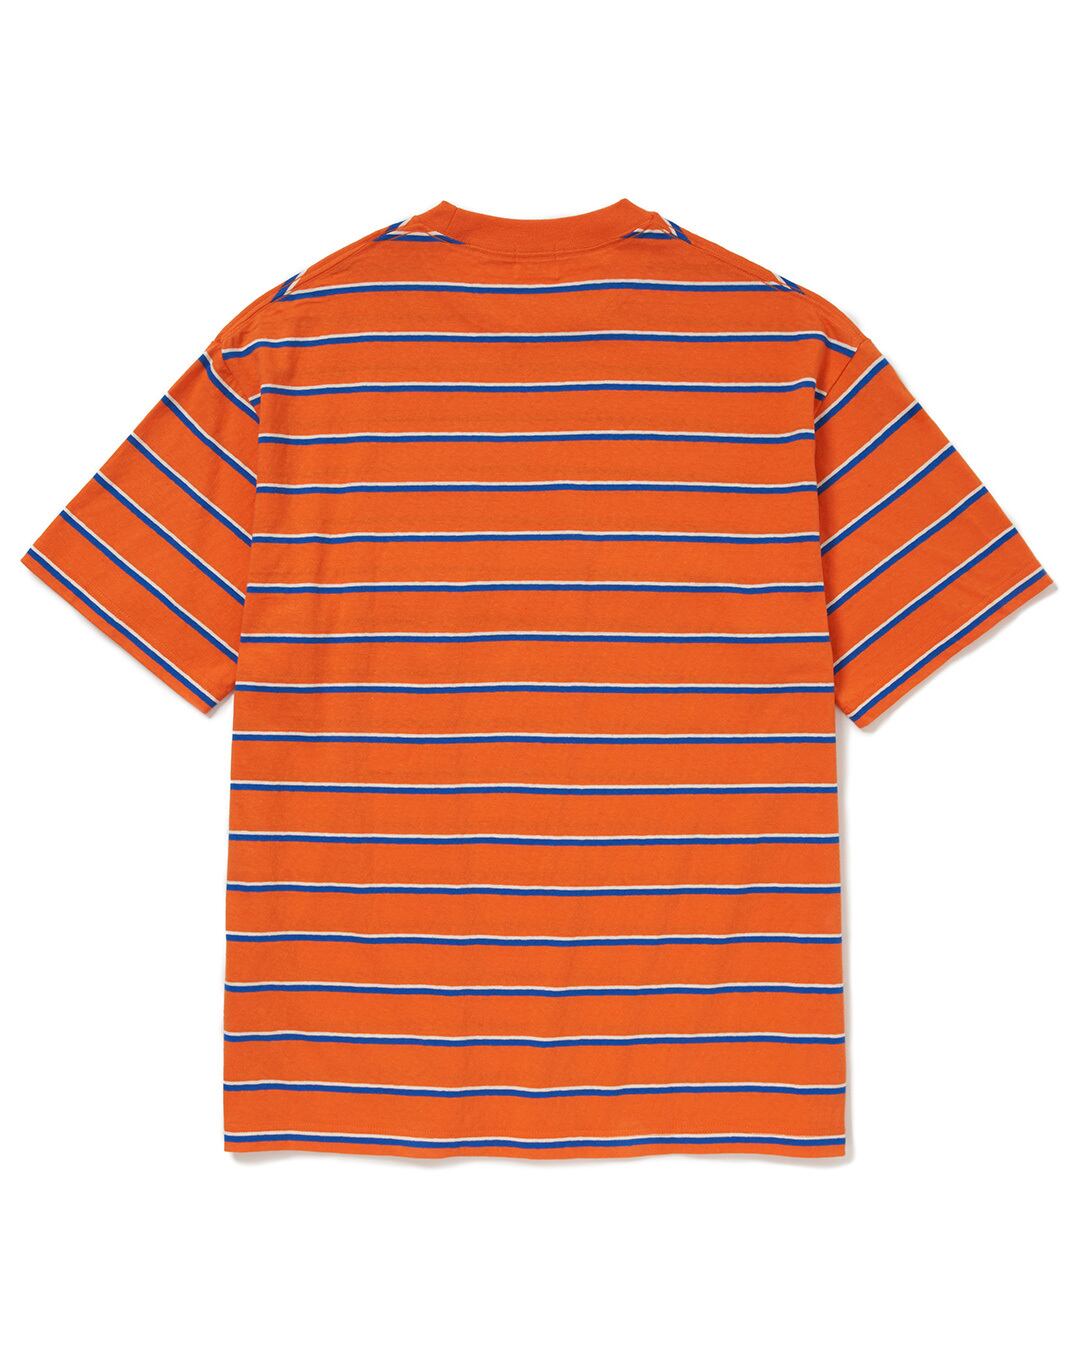 Just Right “DR Striped Tee” Orange x Blue | Just Right